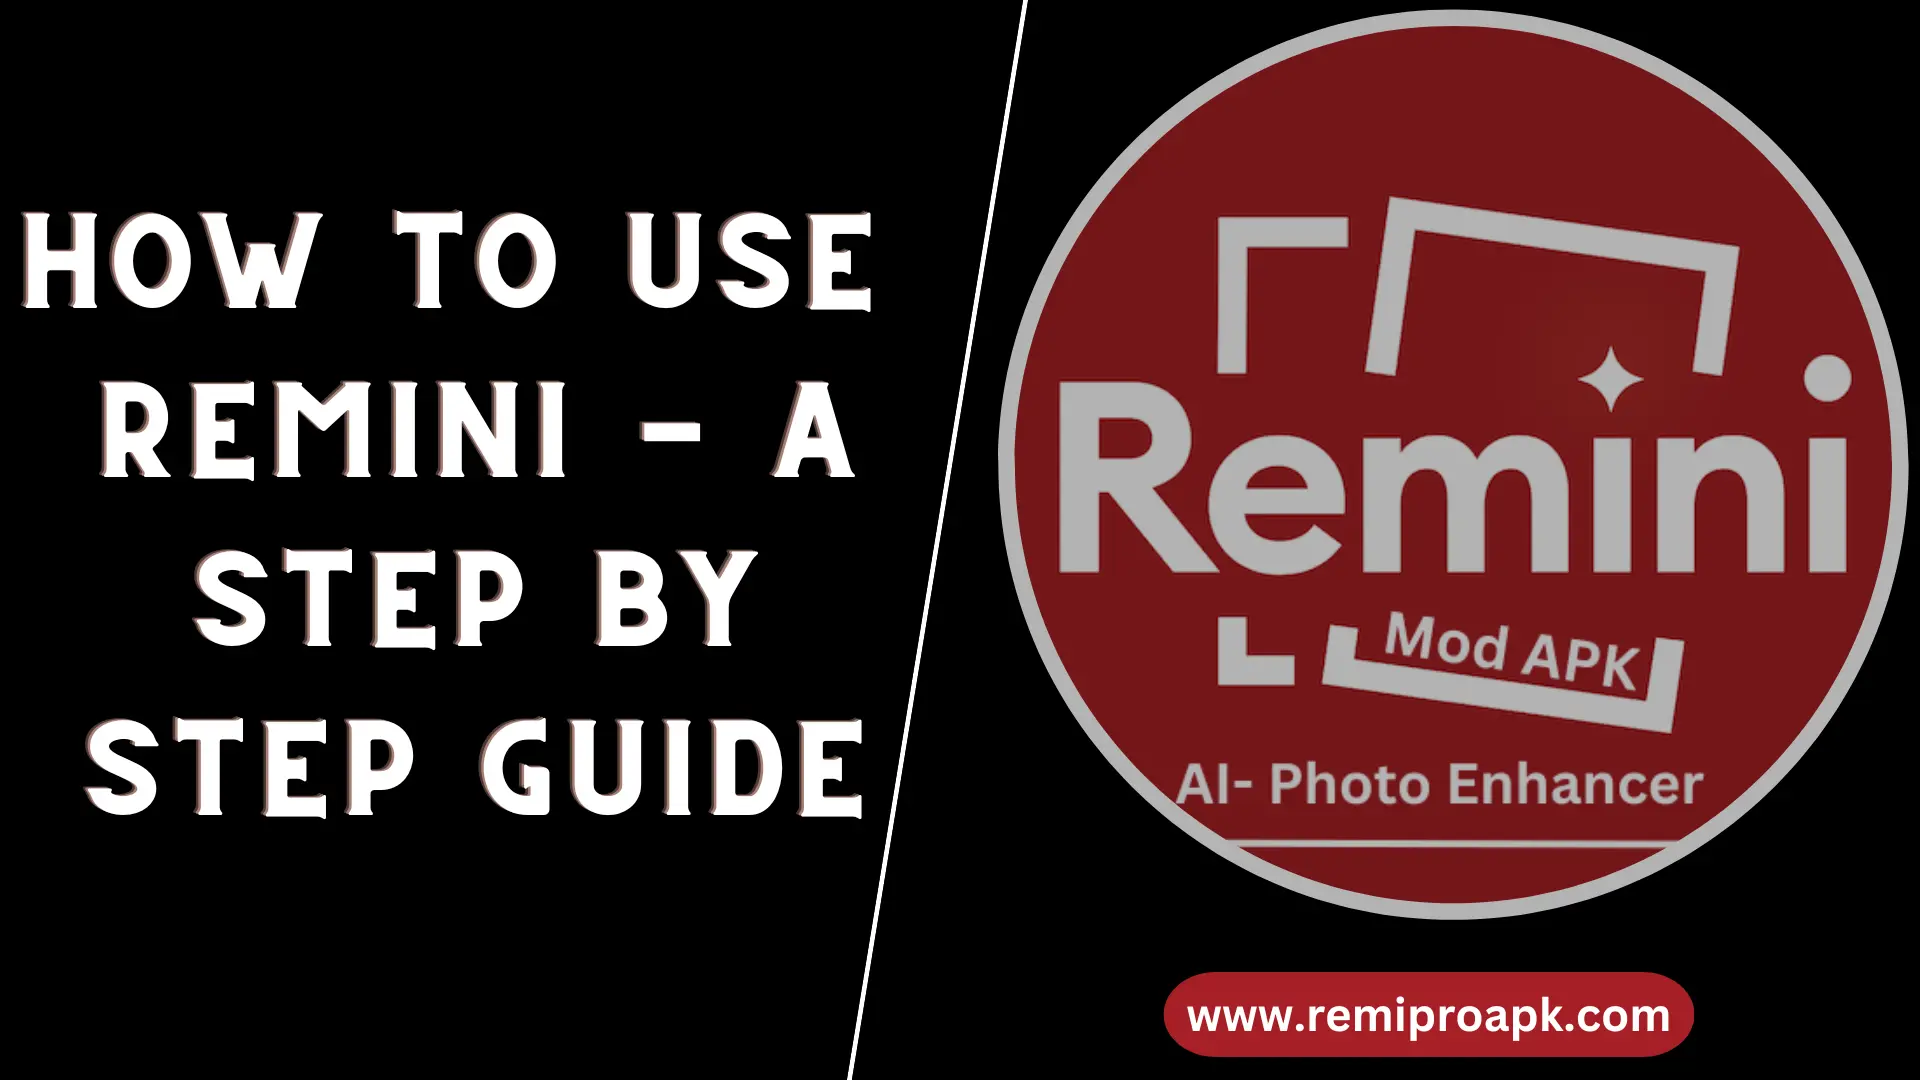 featured image - how to use remini